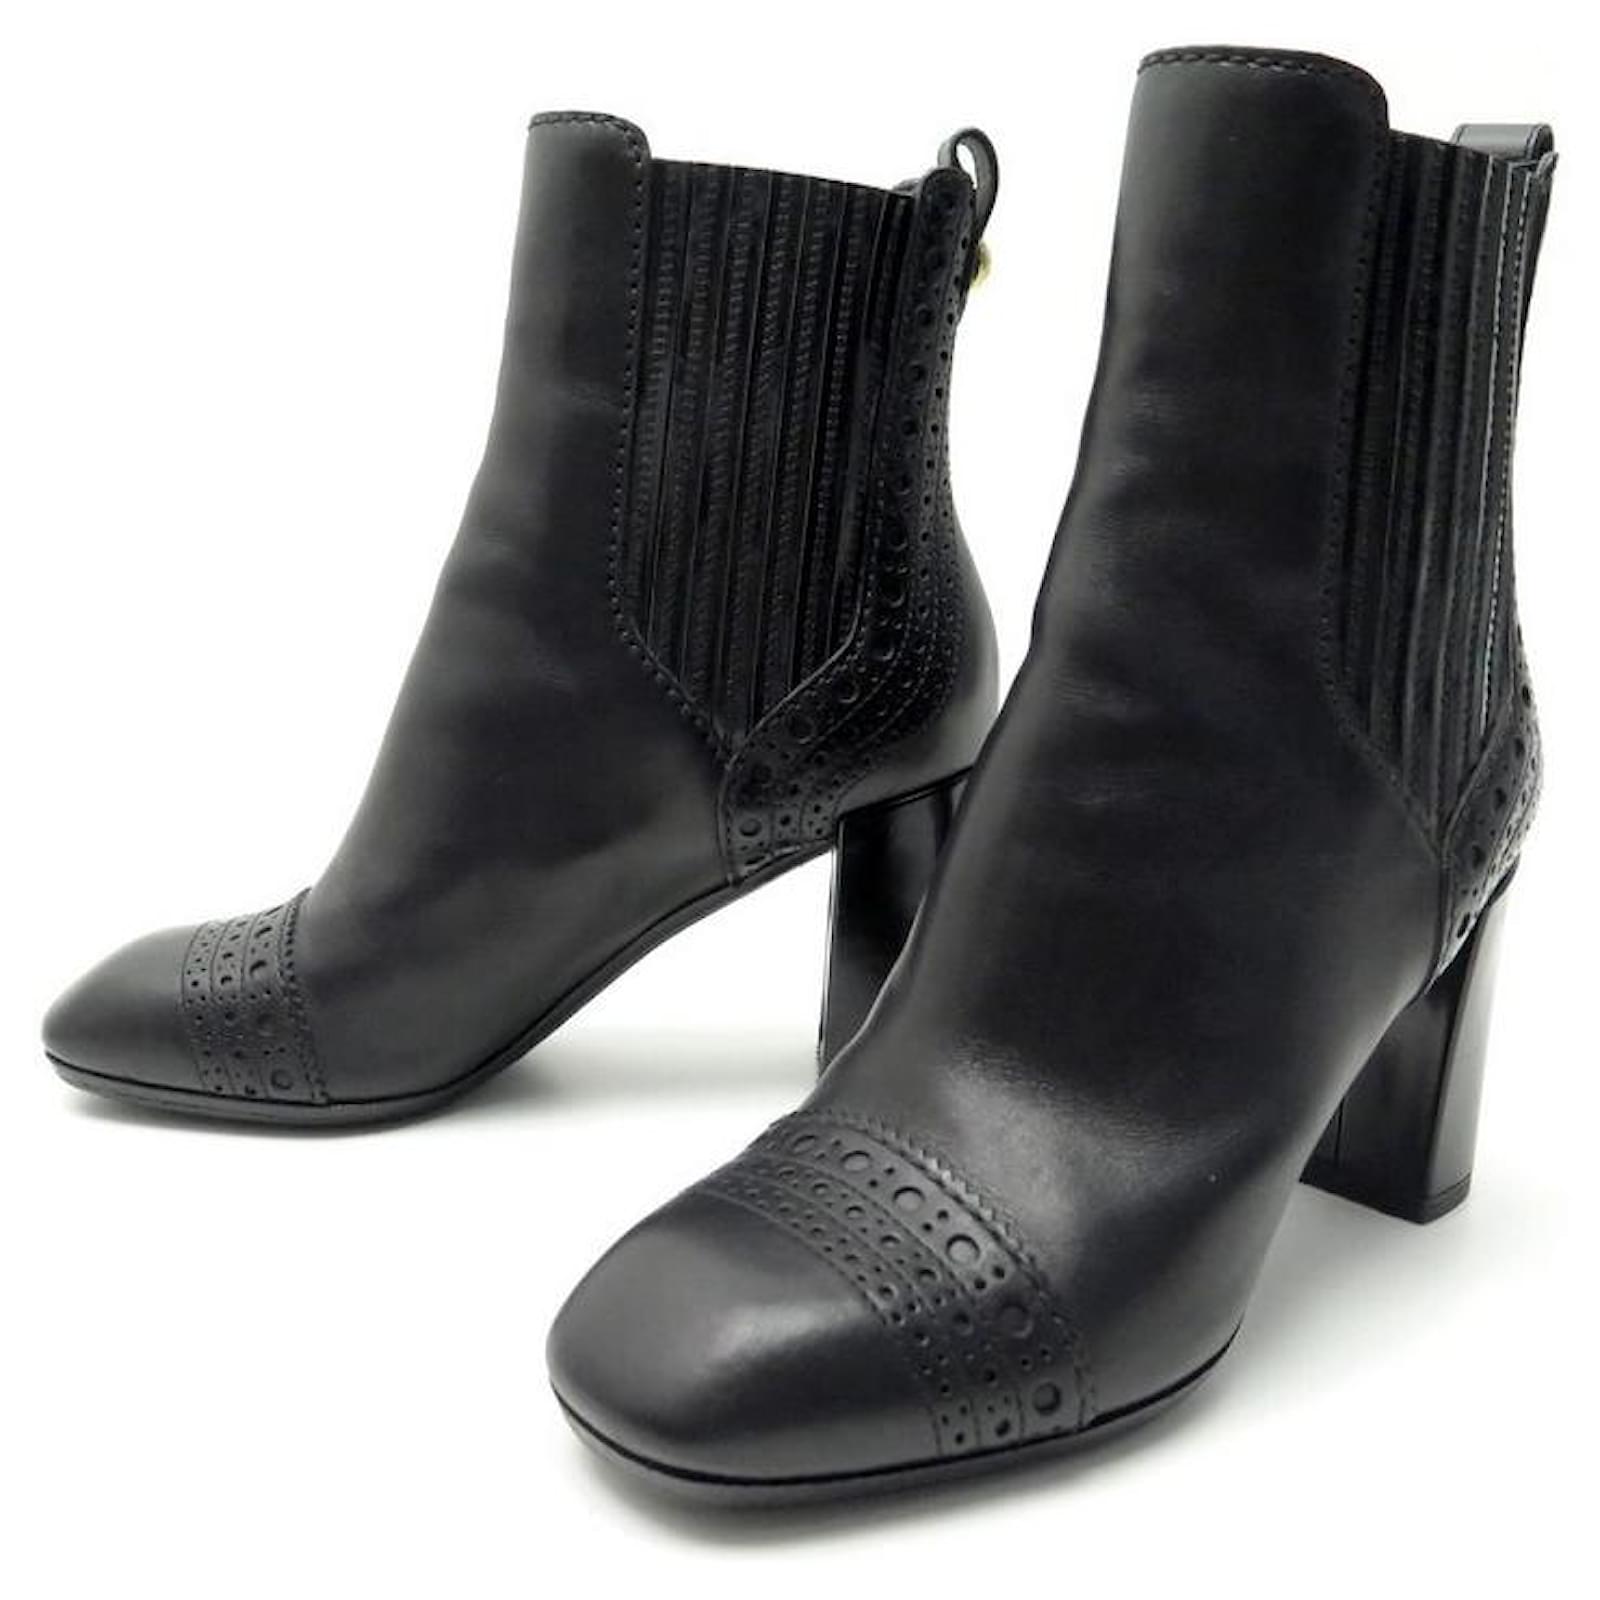 NEW LOUIS VUITTON SHOES ANKLE BOOTS IN BLACK LEATHER 35 ANKLE BOOTS NEW ...